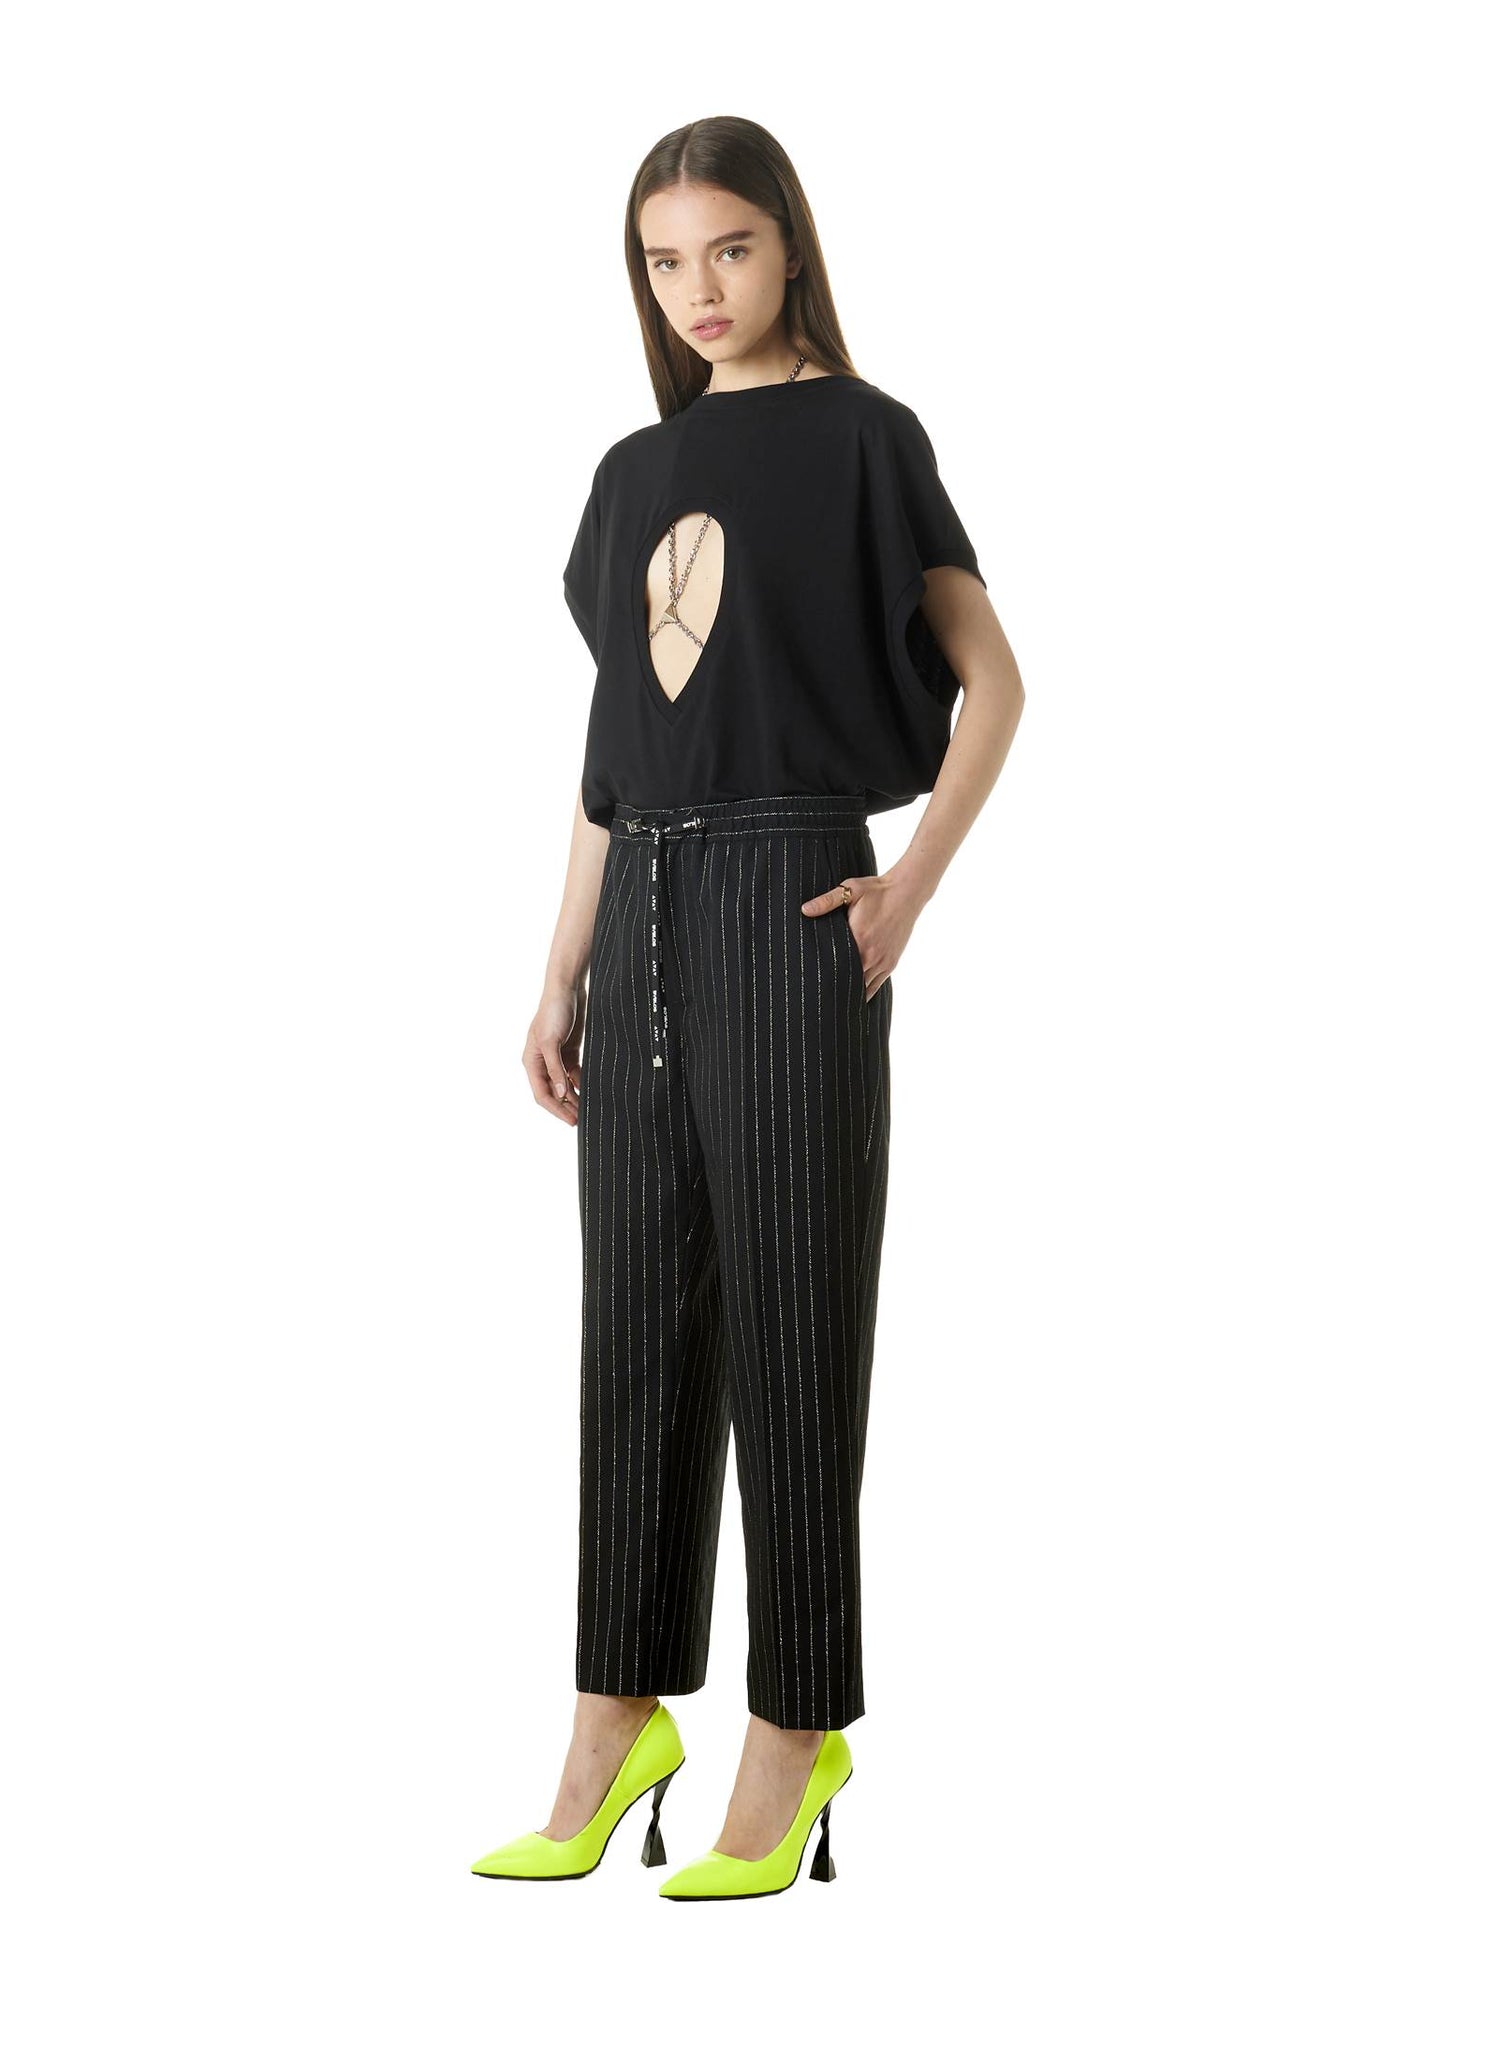 Trousers "Pin-Striped"